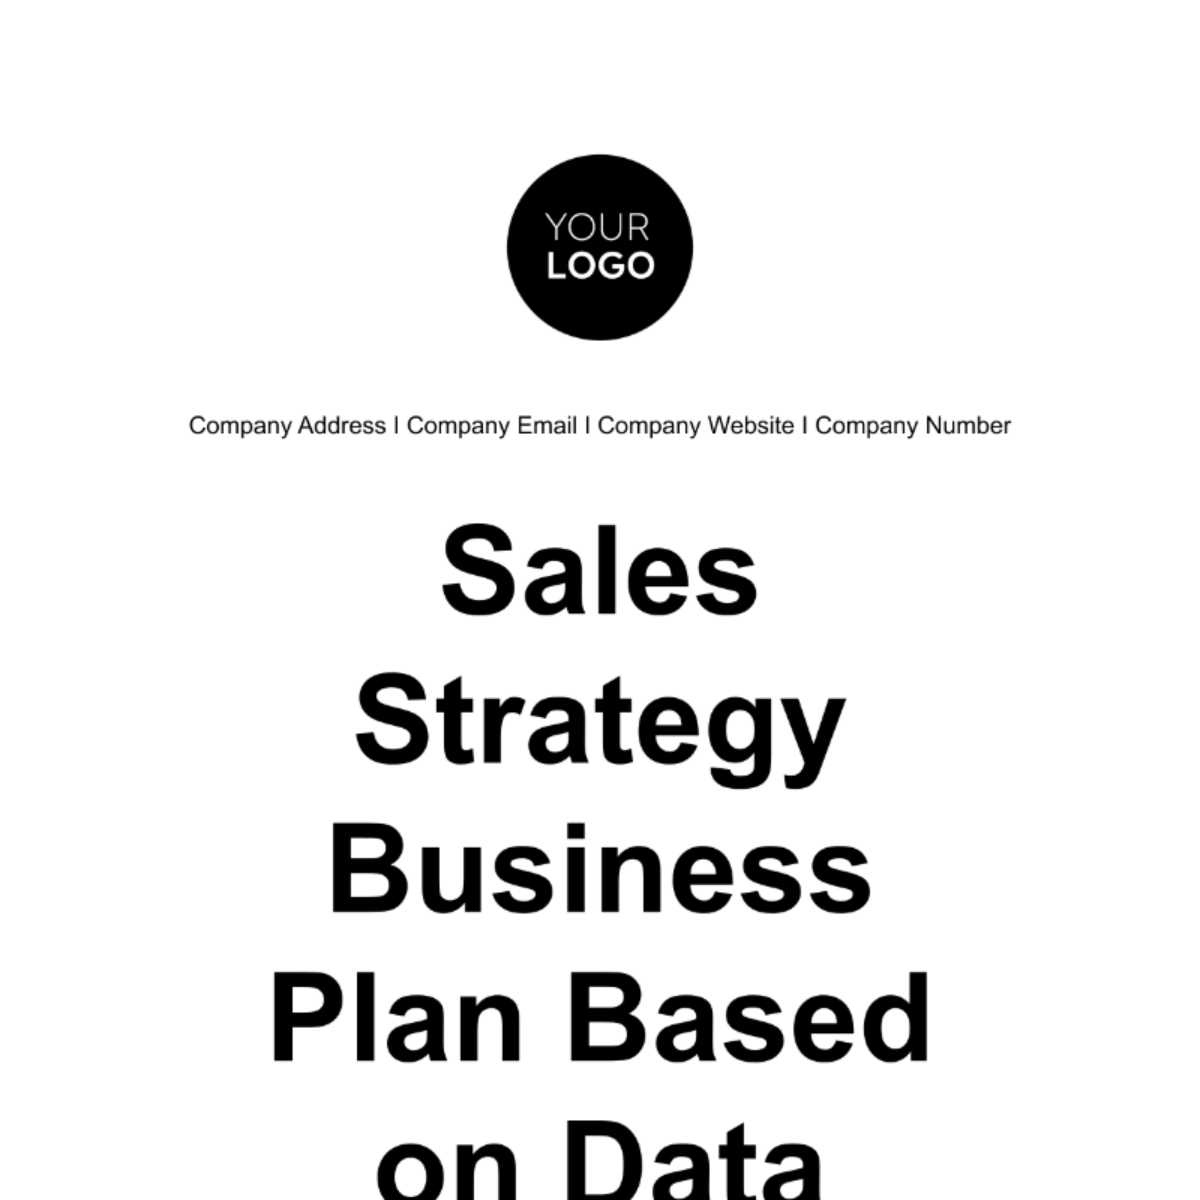 Sales Strategy Business Plan Based on Data Template